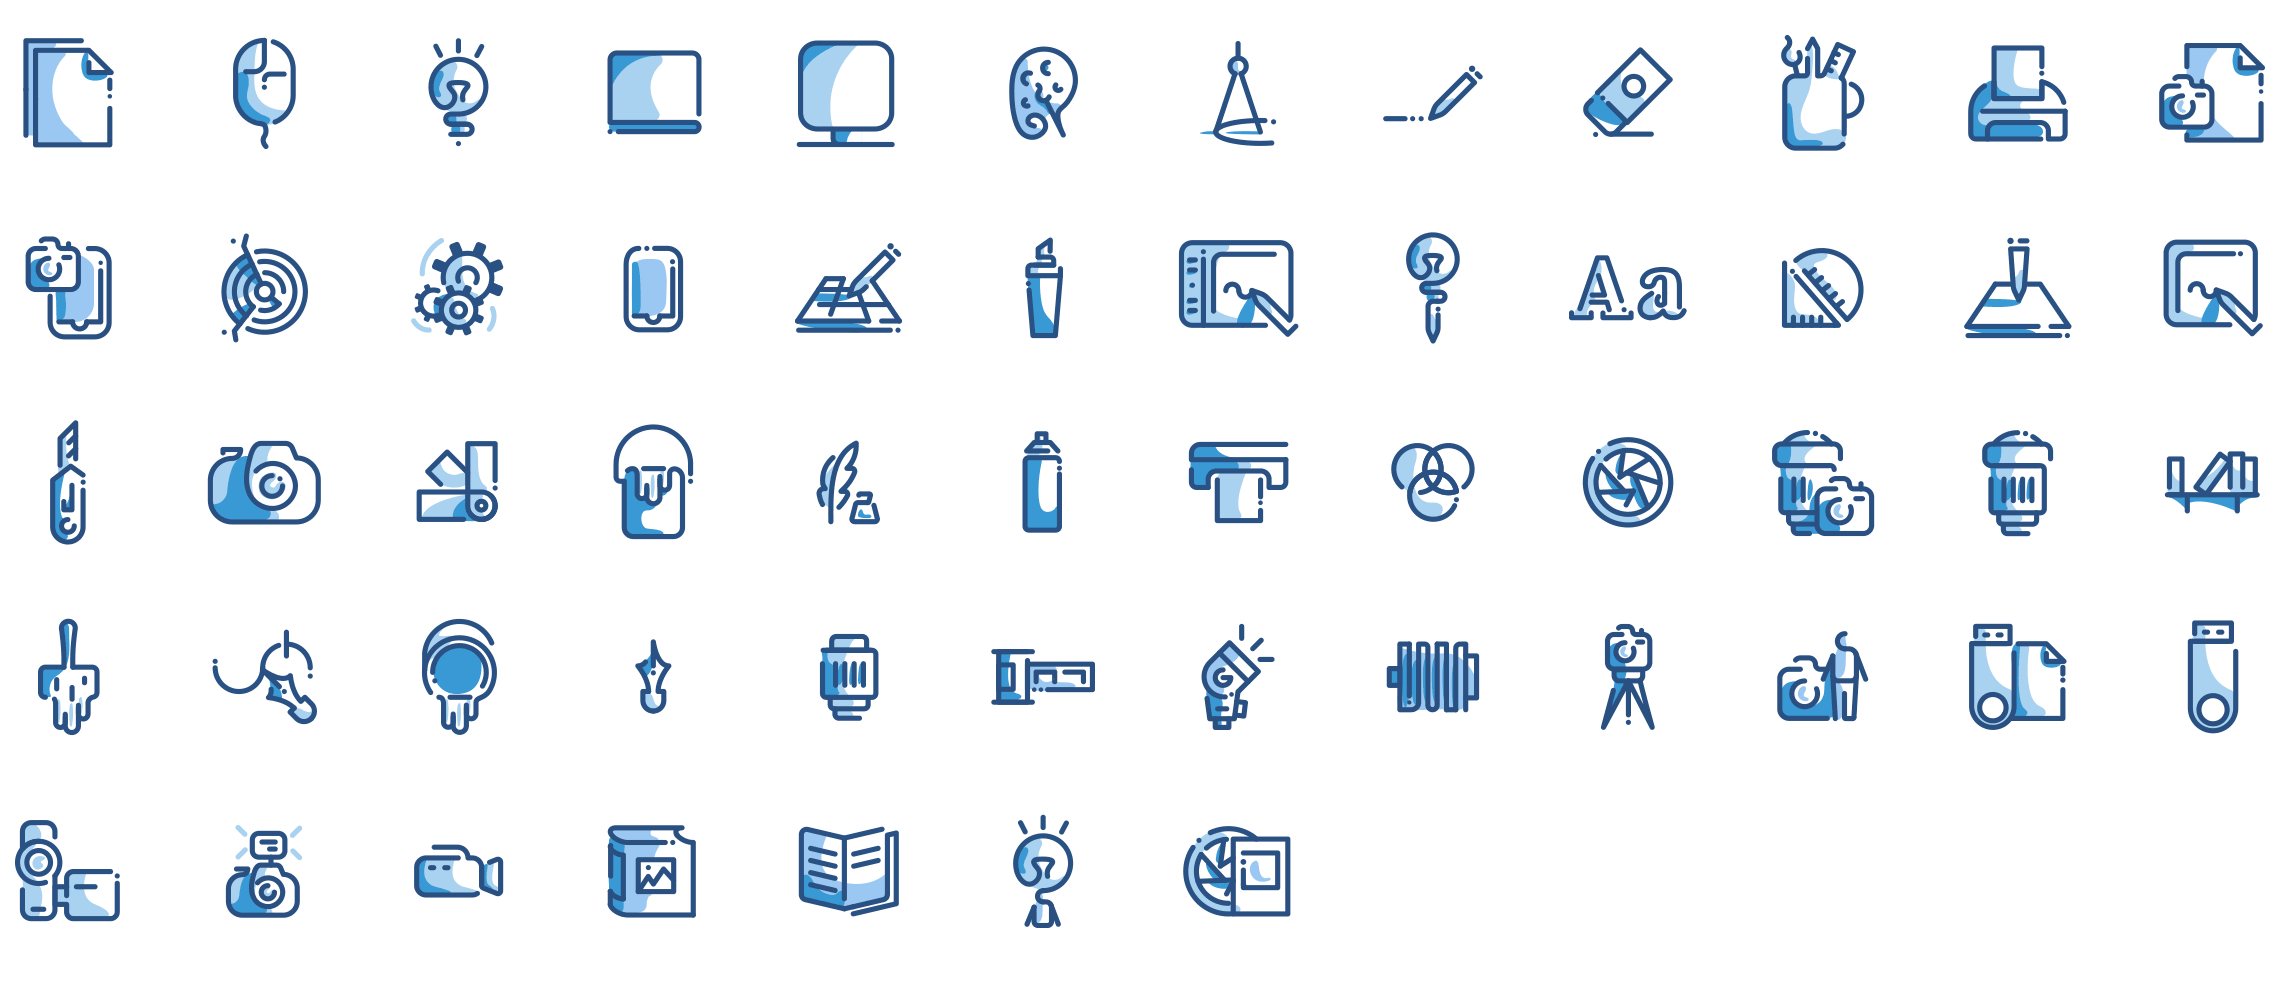 photography-and-graphic-design-icons-set-preview